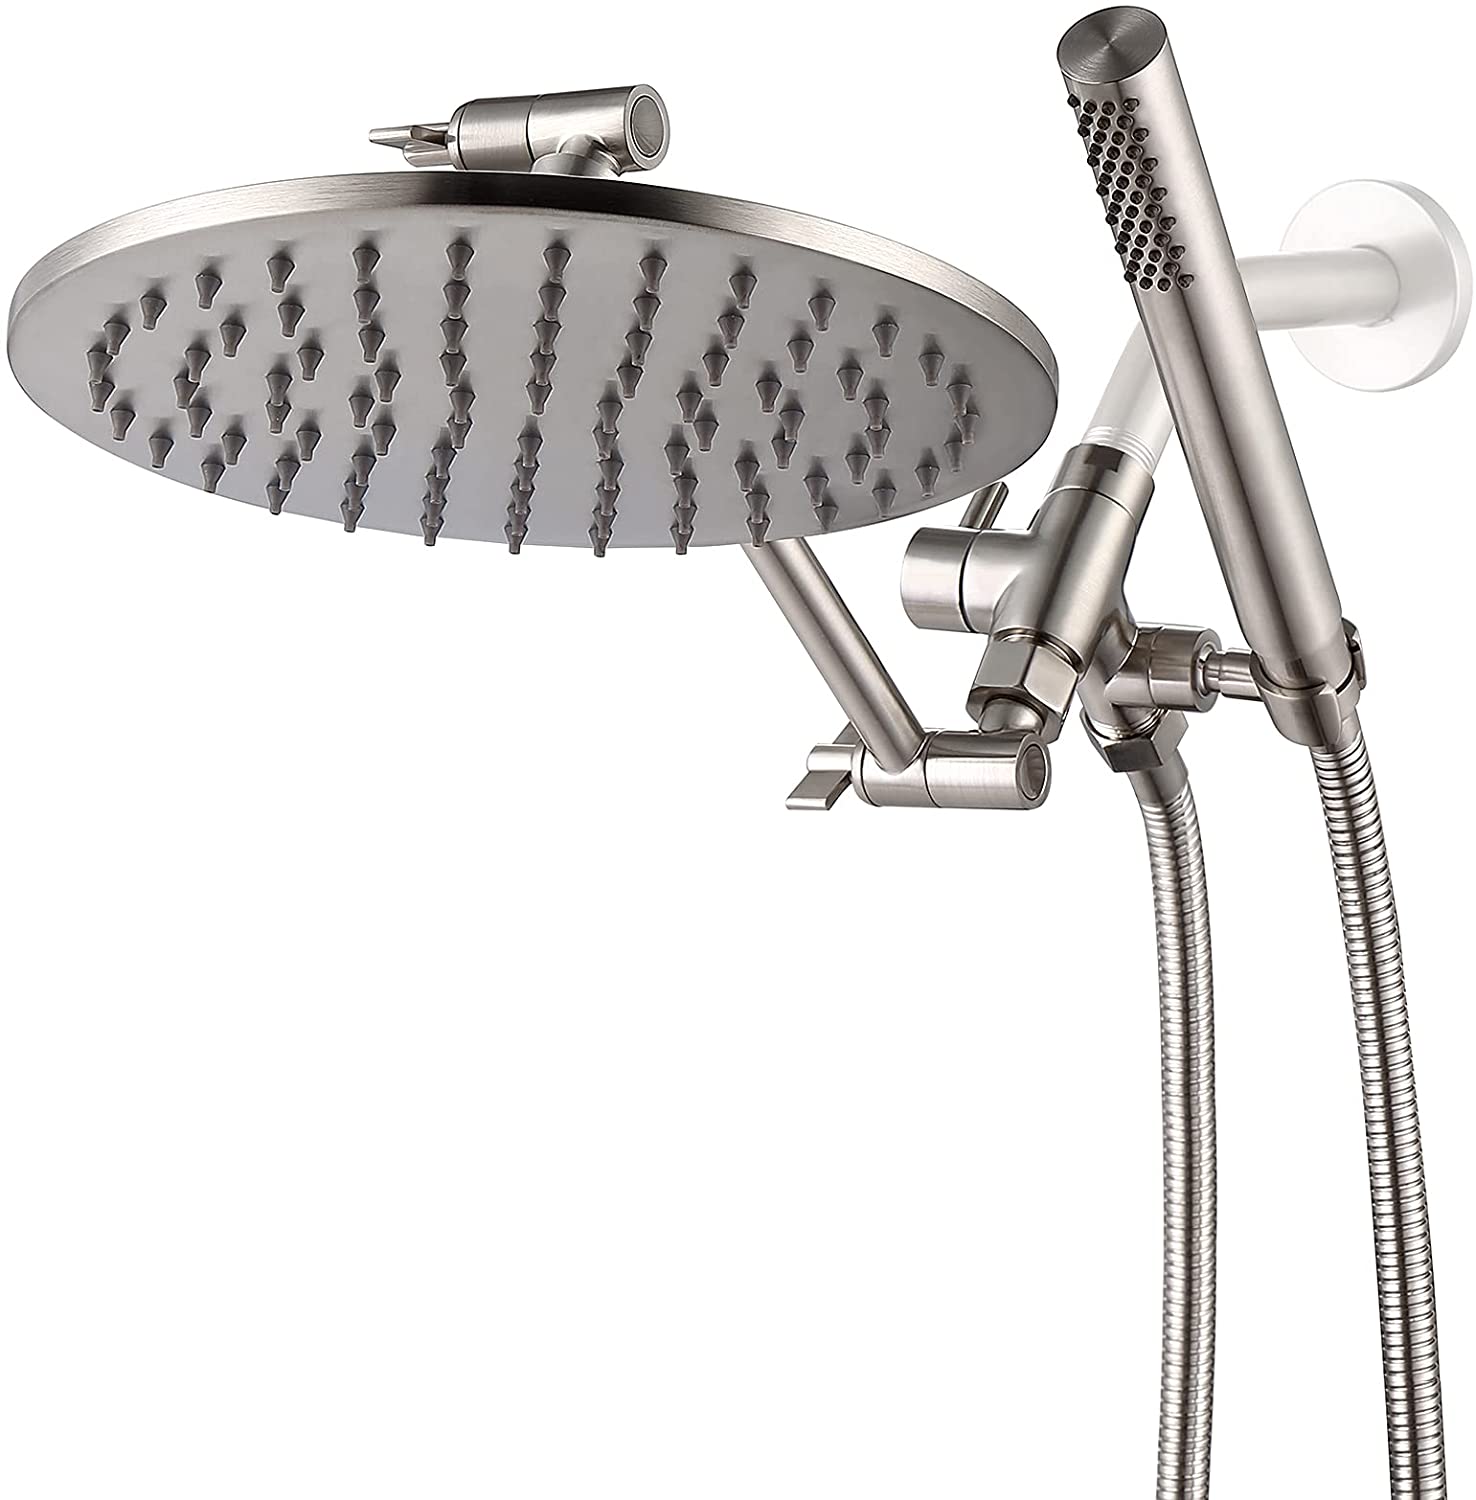 G-Promise All Metal Rotatable Brushed Nickel Shower Head With Handheld Sprayer